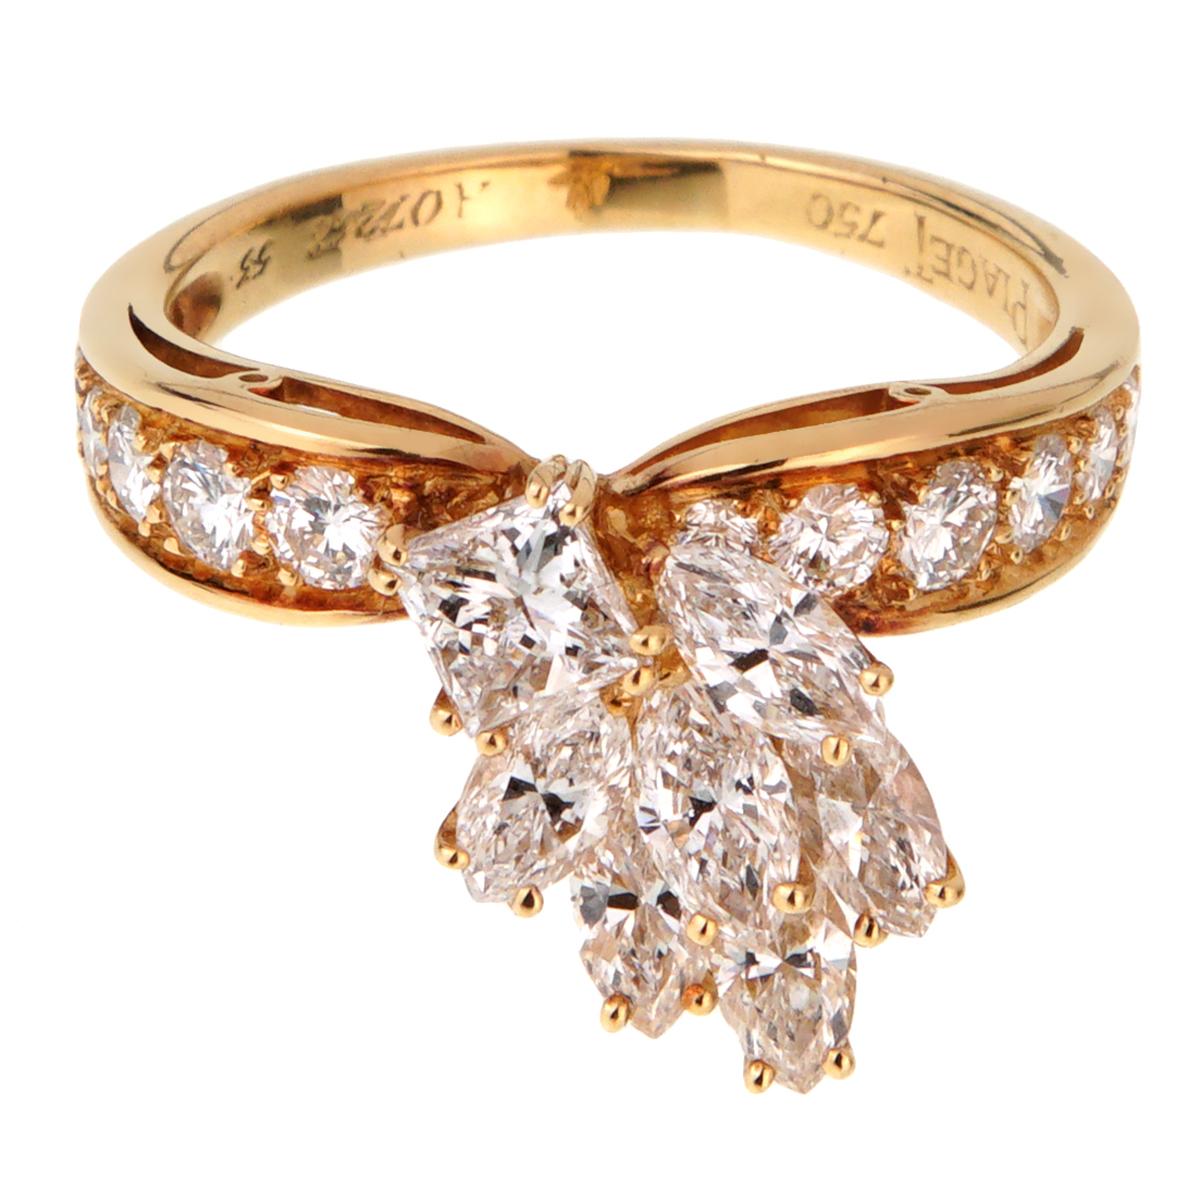 A magnificent Piaget cocktail ring showcasing a fan pattern with round brilliant cut diamonds, marquise cuts, and a single princess cut diamond in 18k yellow gold.

Size 6 1/2 (Resizeable)